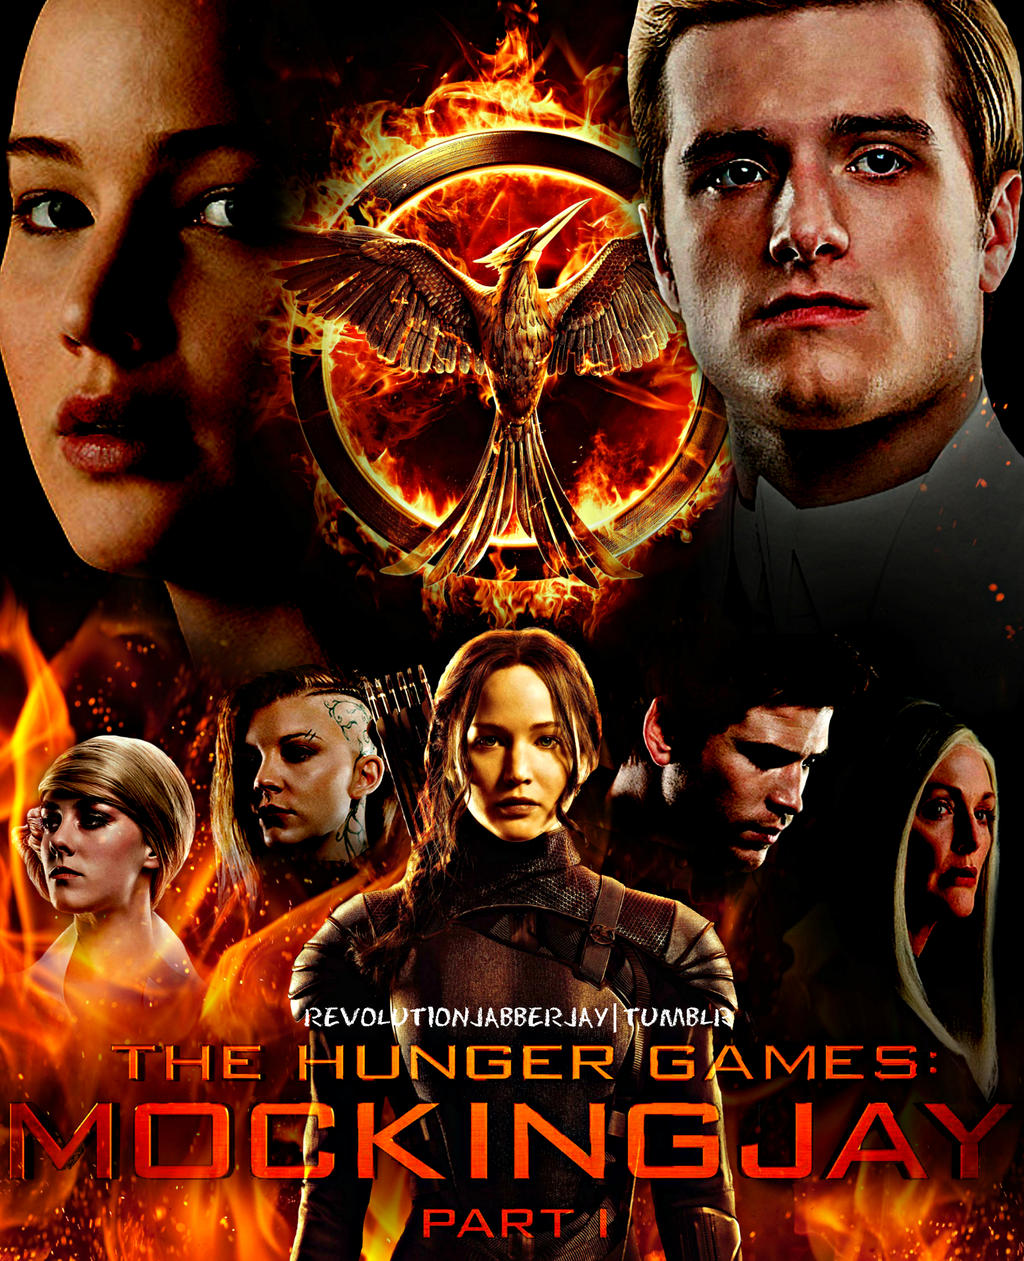 The Hunger Games: Mockingjay Part 1 | Poster